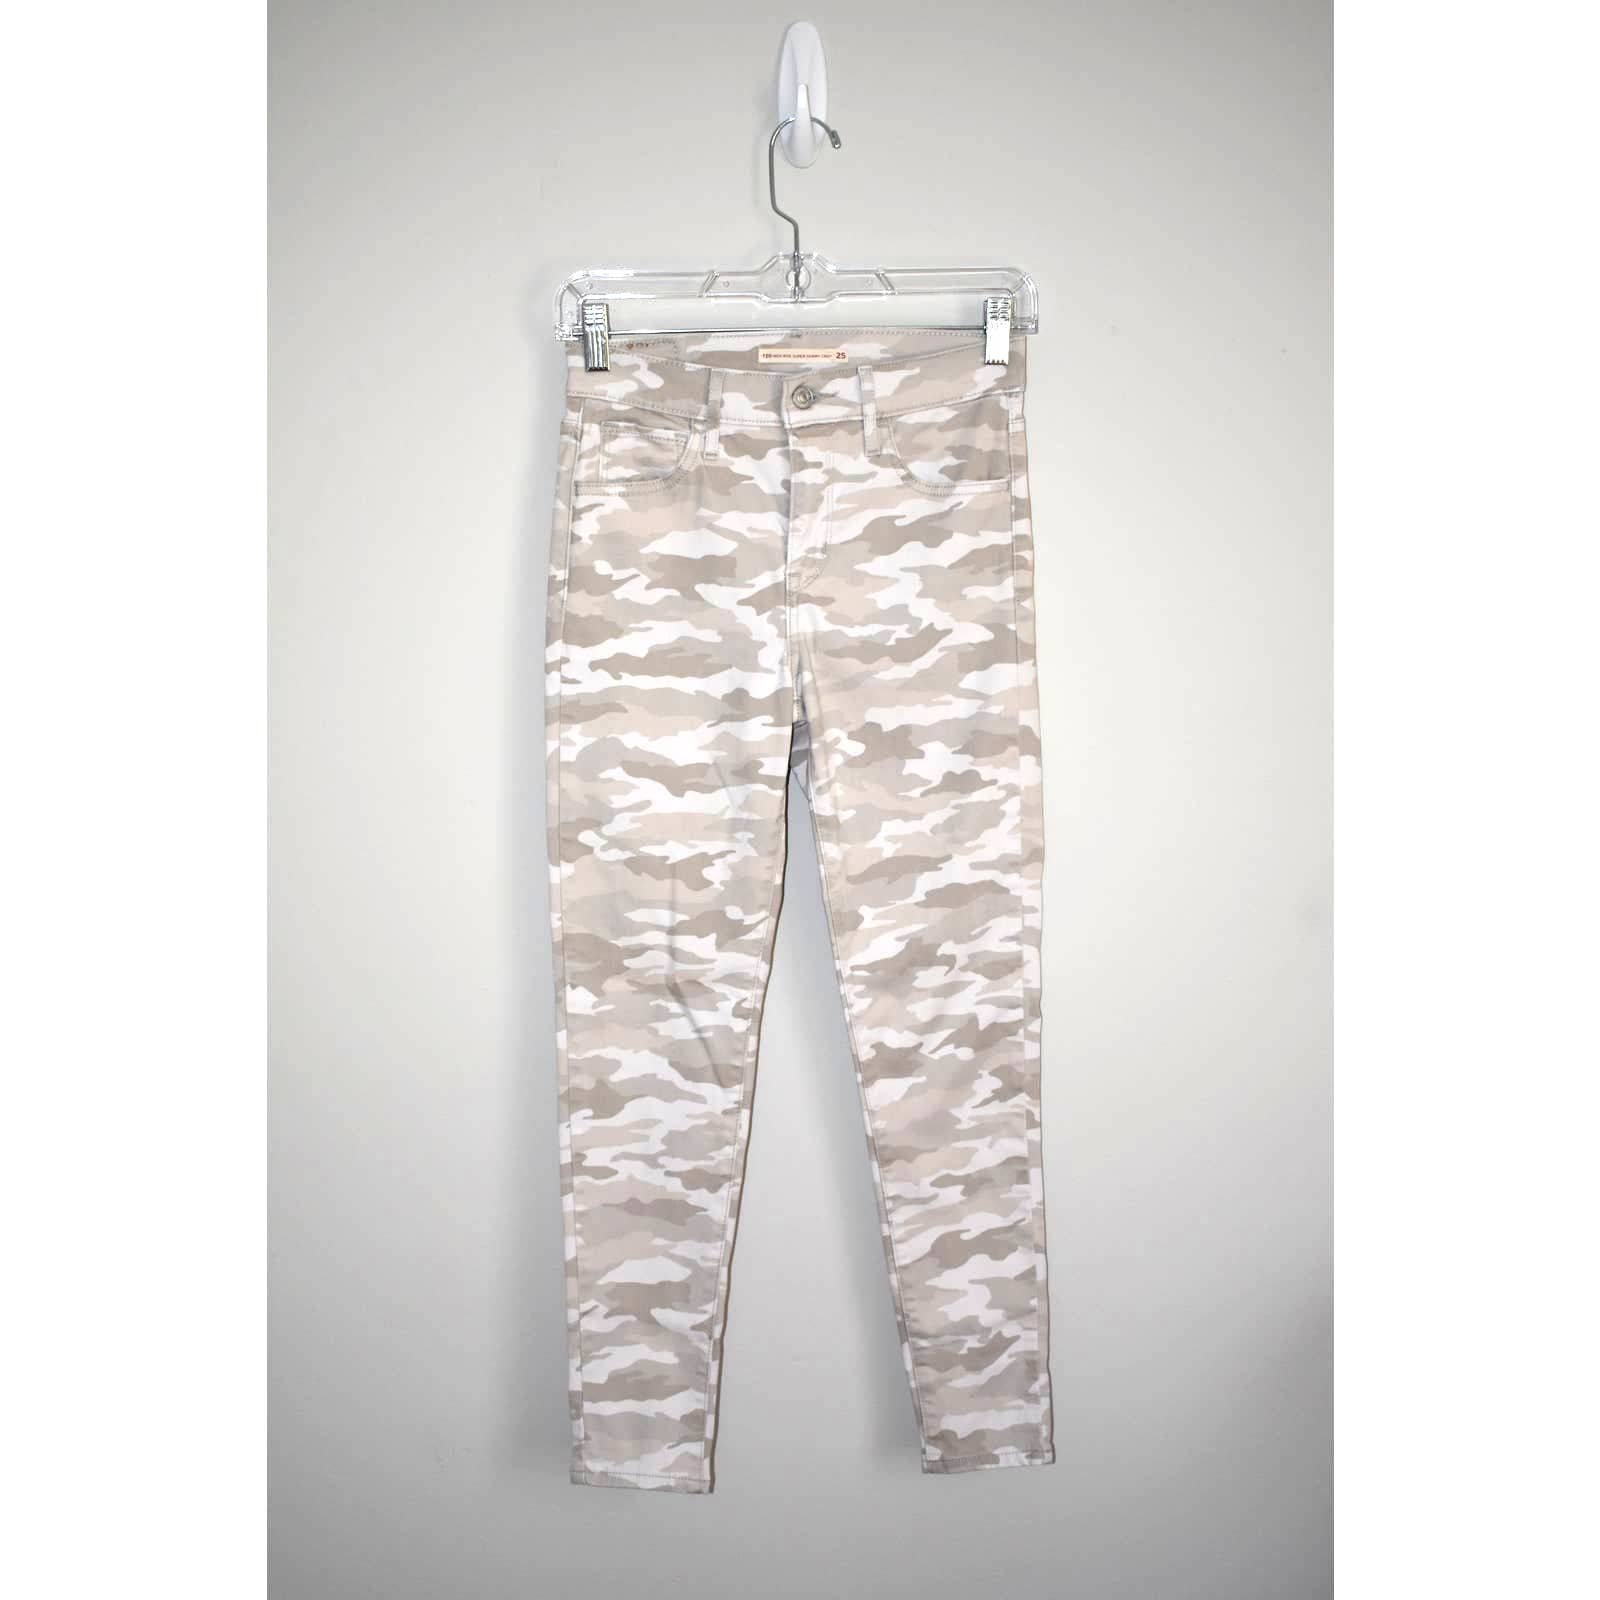 Gorgeous Levi´s Camo High Rise Super Skinny Crop Jean Size 25 PBgtGgmC3 Everyday Low Prices